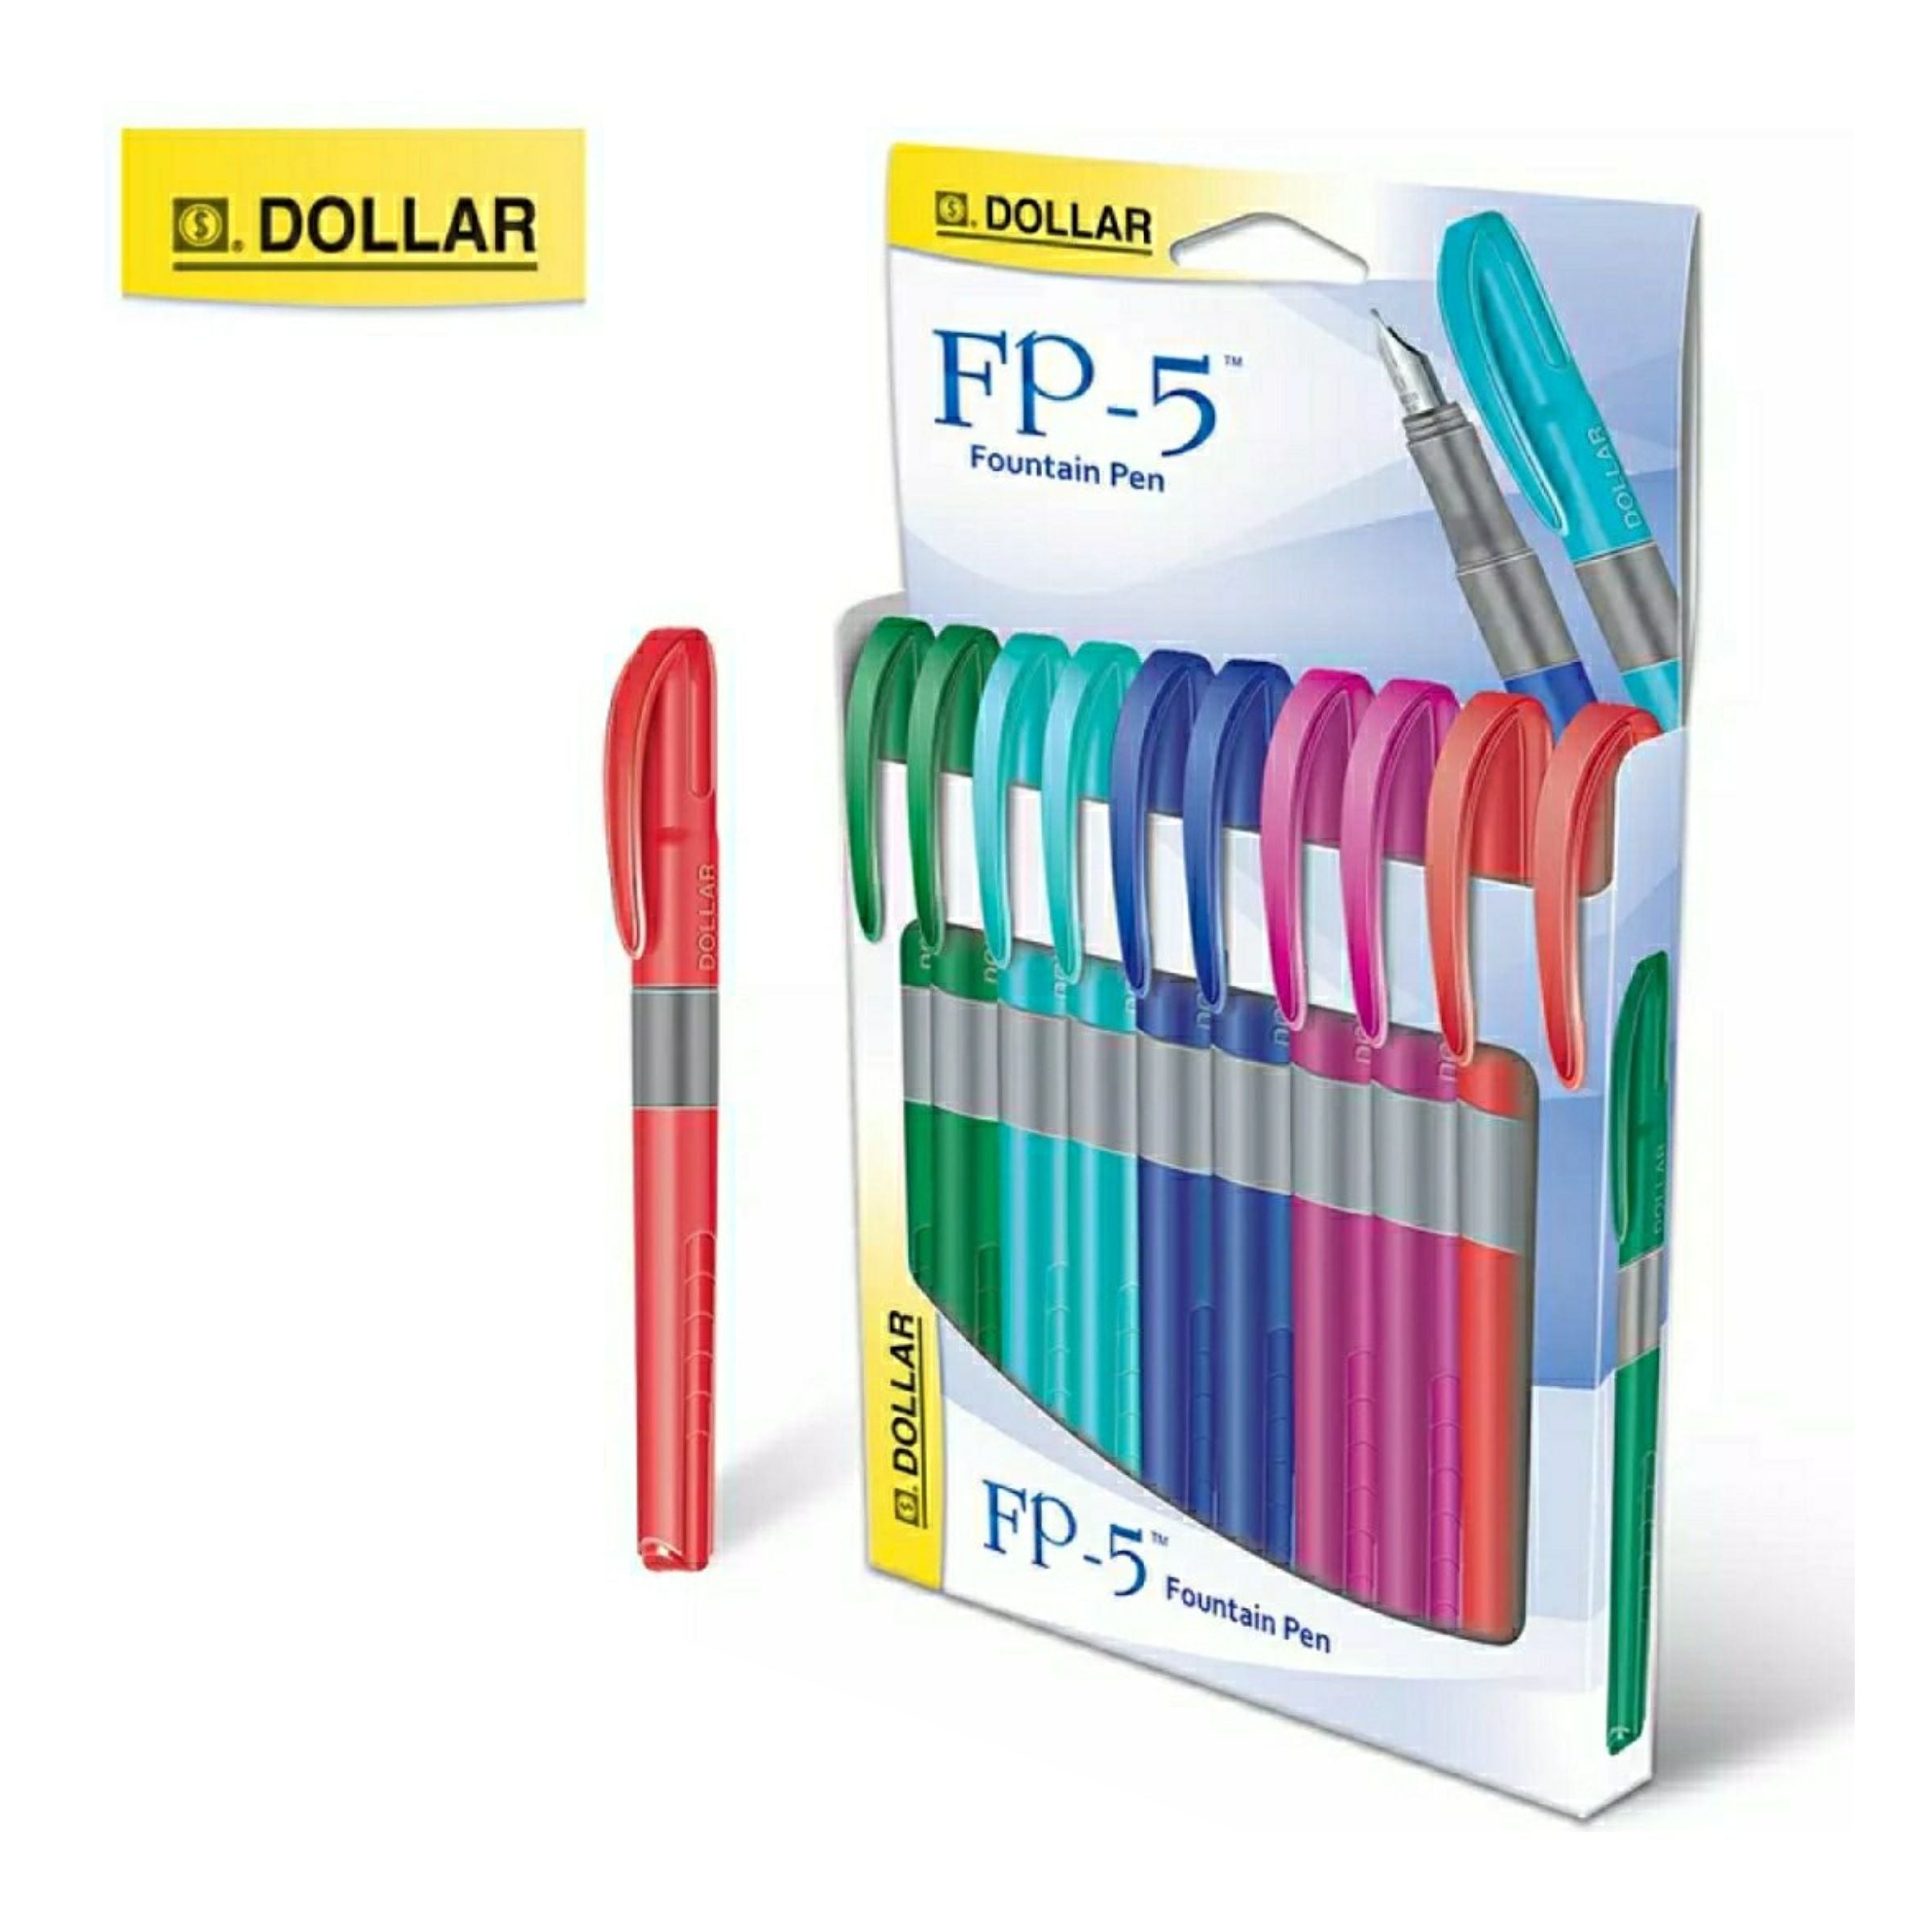 https://stationers.pk/products/dollar-fp-5-fountain-pen-pack-of-10